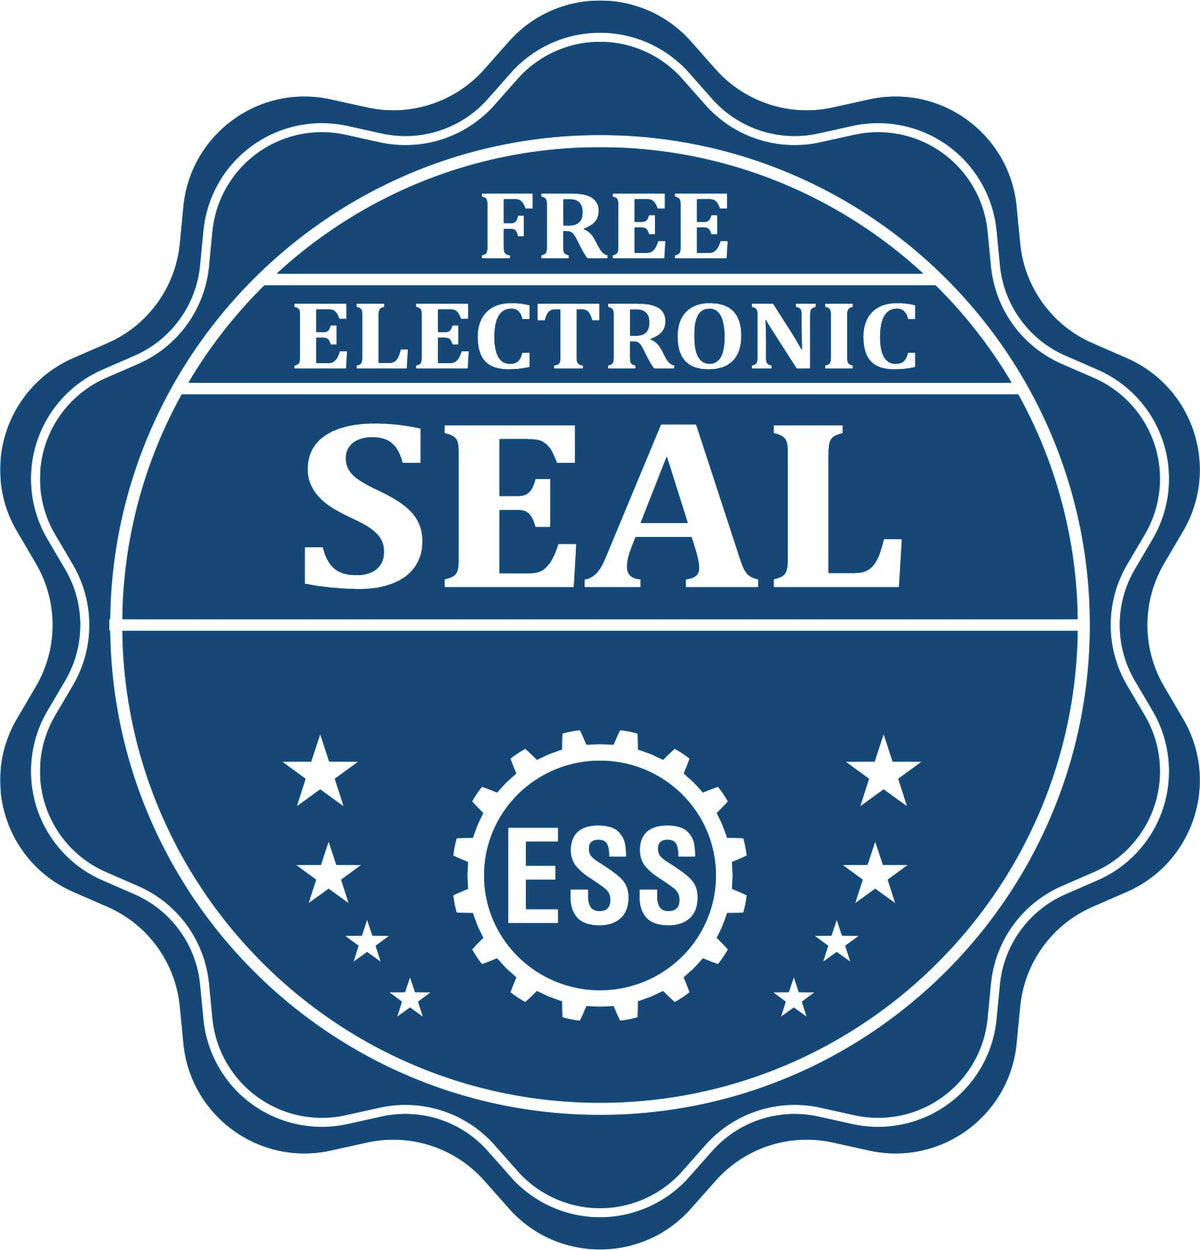 A badge showing a free electronic seal for the Gift Pennsylvania Architect Seal with stars and the ESS gear on the emblem.